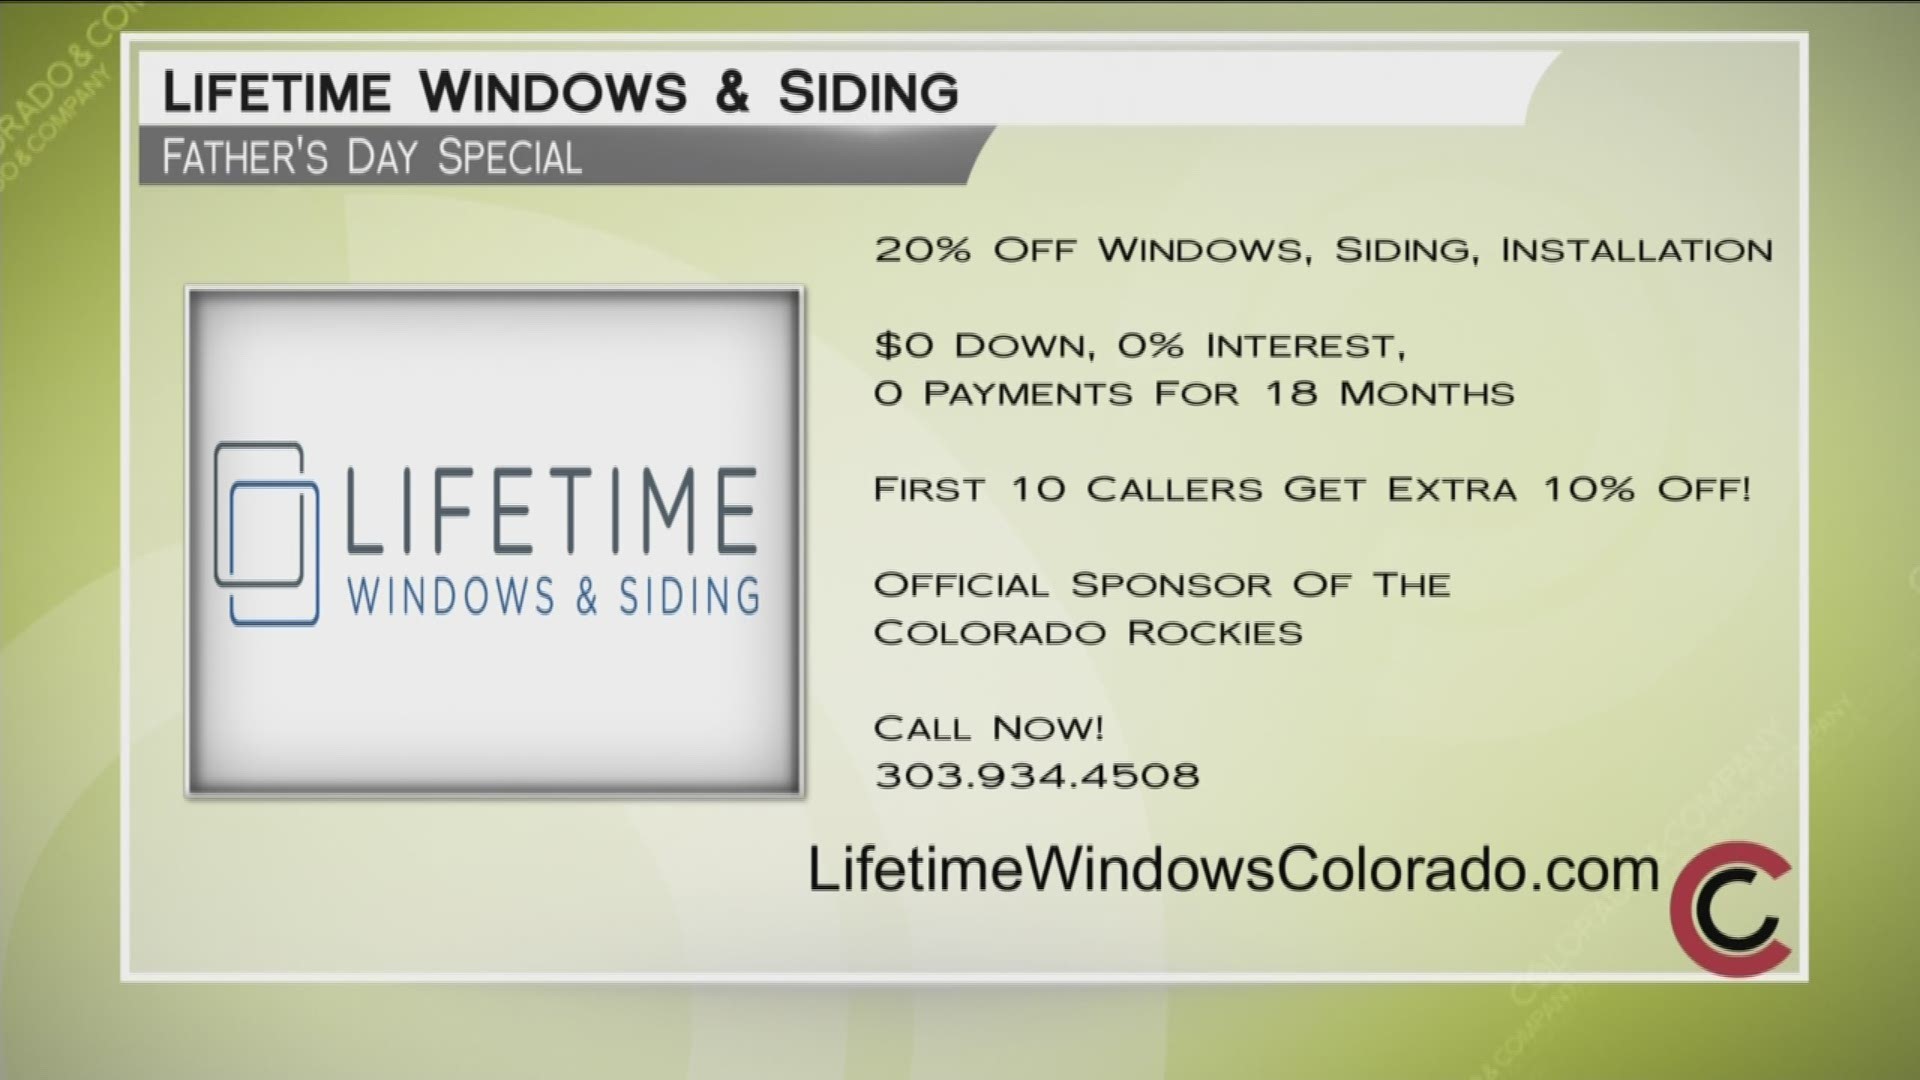 Call Lifetime at 800.GET.WINDOWS or 303.934.4508 and save 20% on your windows, siding and installation. The first 10 callers will get an extra 10% off! Schedule your custom window and siding project now! Learn more online at www.LifetimeWindowsColorado.com. 
THIS INTERVIEW HAS COMMERCIAL CONTENT. PRODUCTS AND SERVICES FEATURED APPEAR AS PAID ADVERTISING.